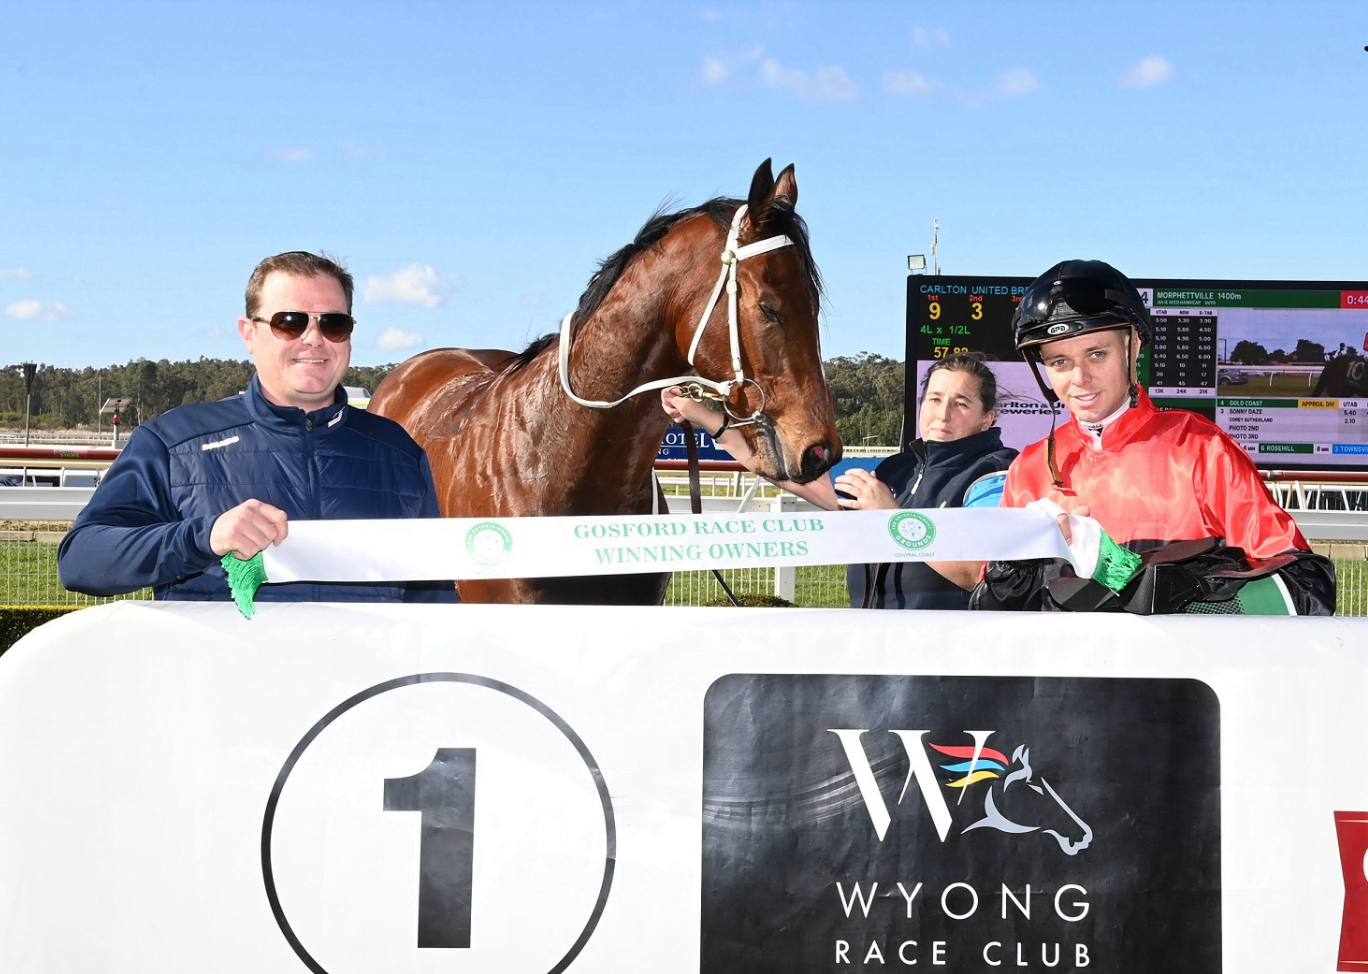 RYAN NAME UP IN LIGHTS AT WYONG  2